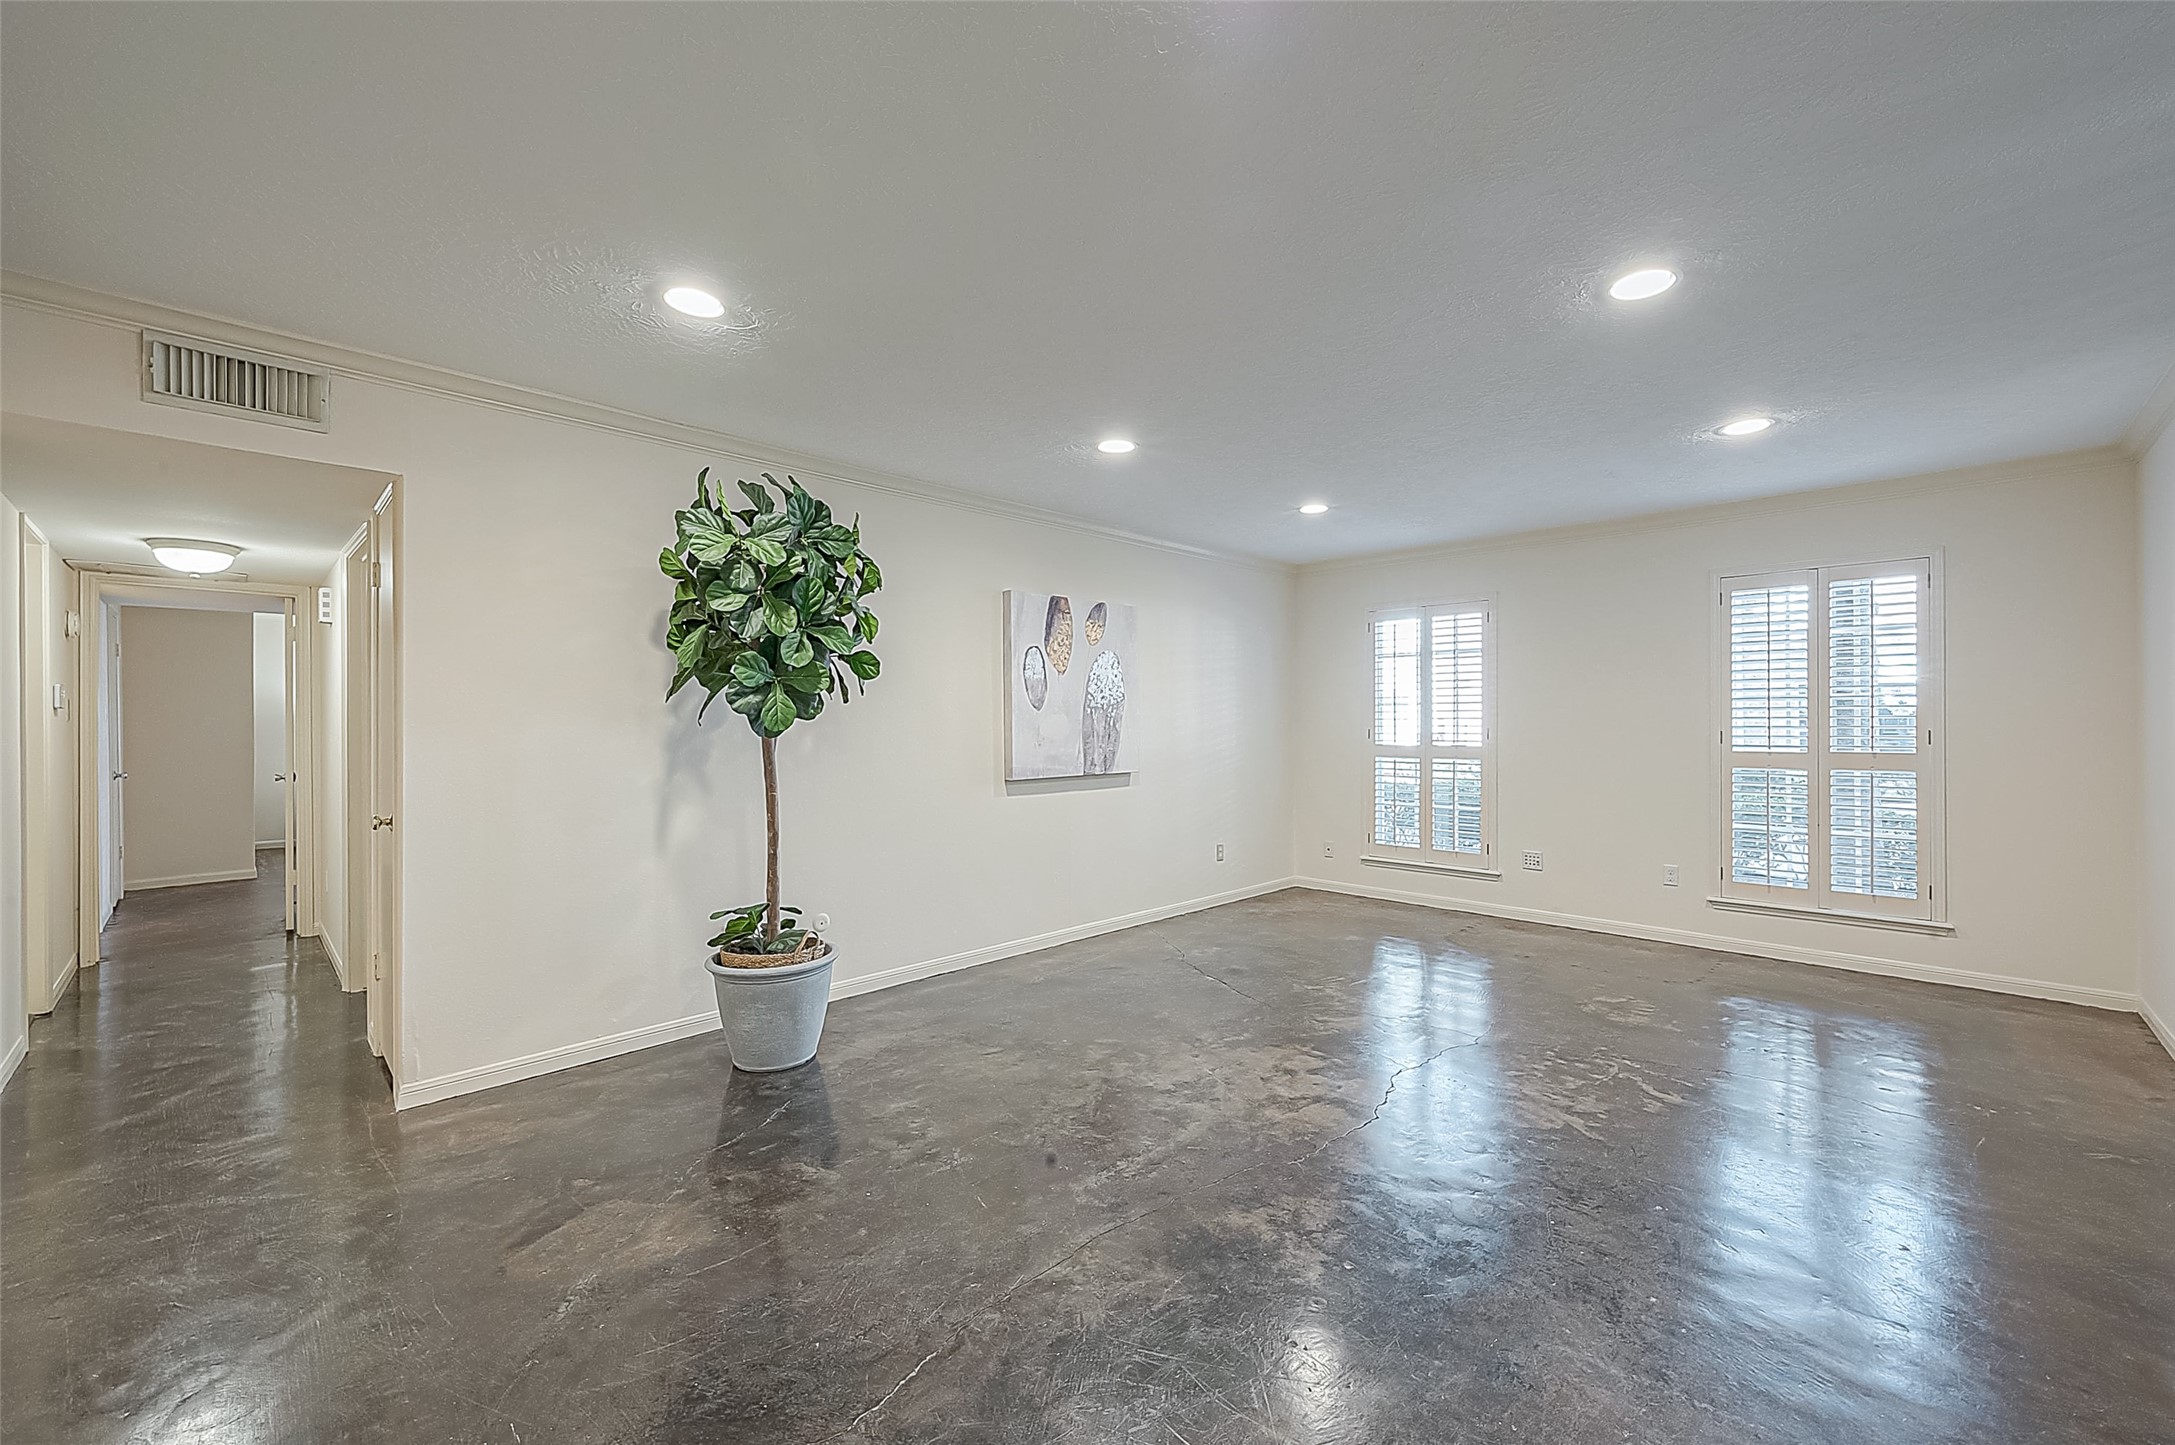 Beautiful plantation shutters and low maintenance concrete floors throughout.